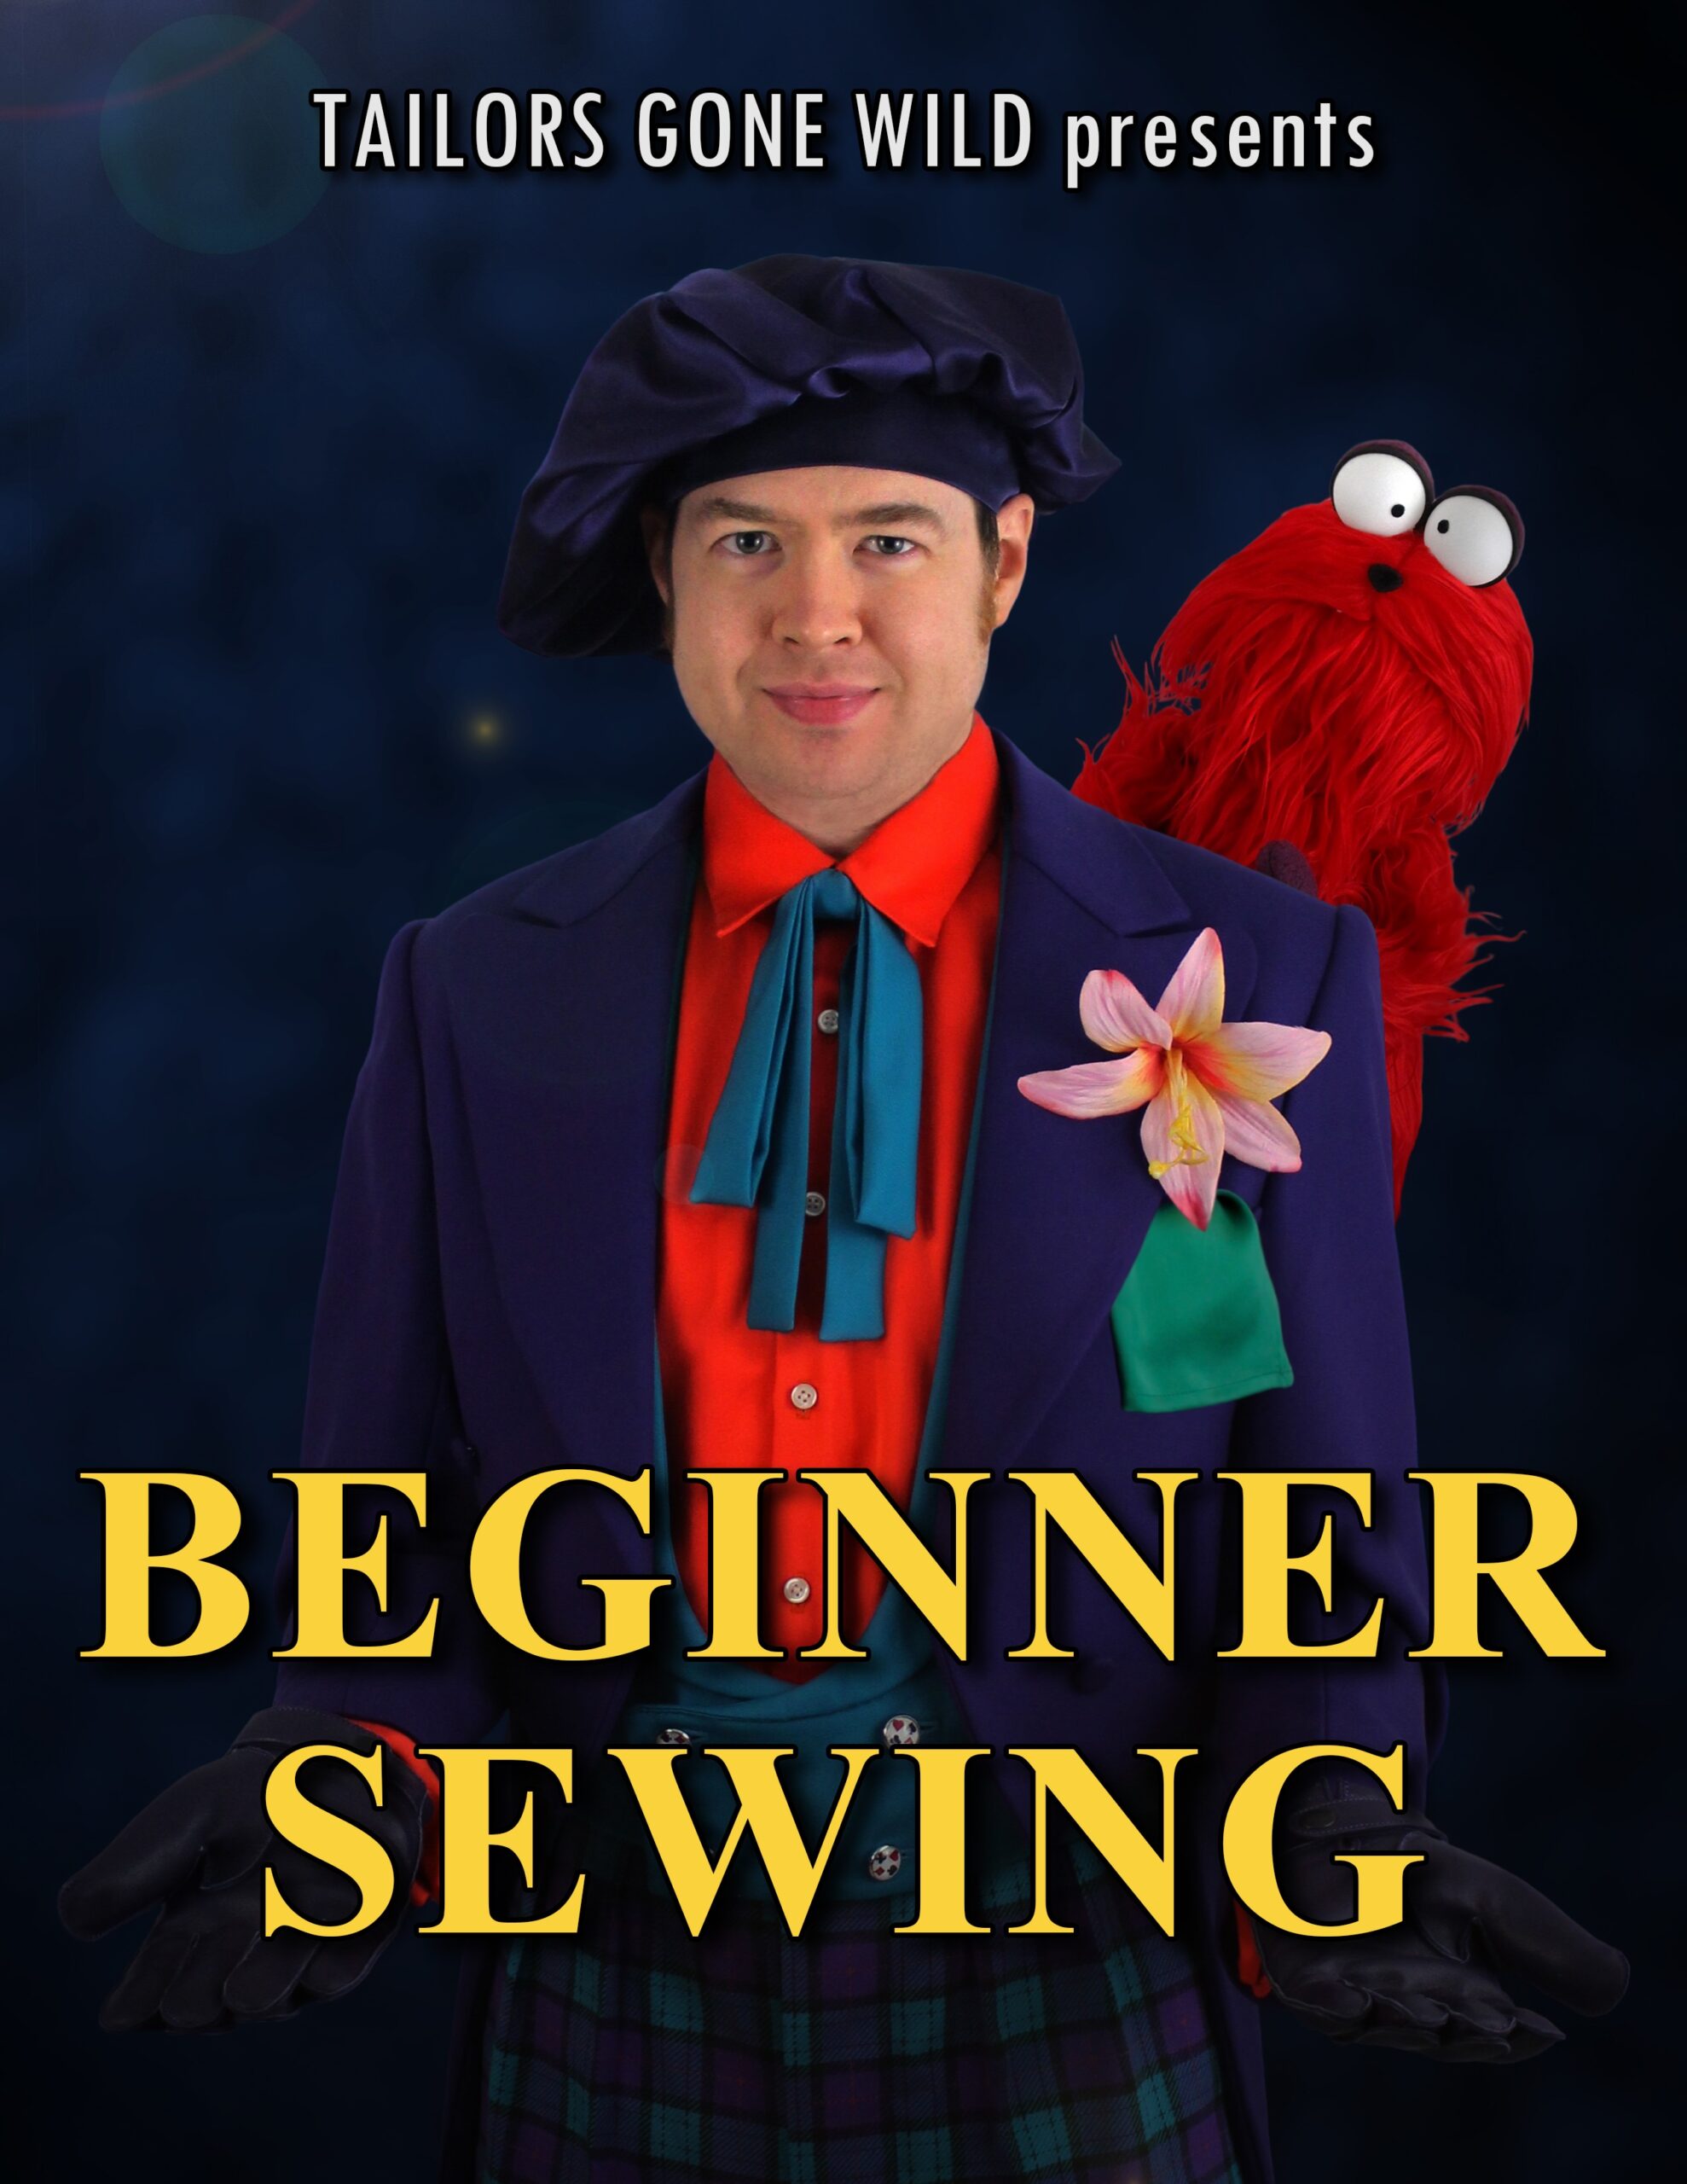 Beginner sewing course - Tailors Gone Wild